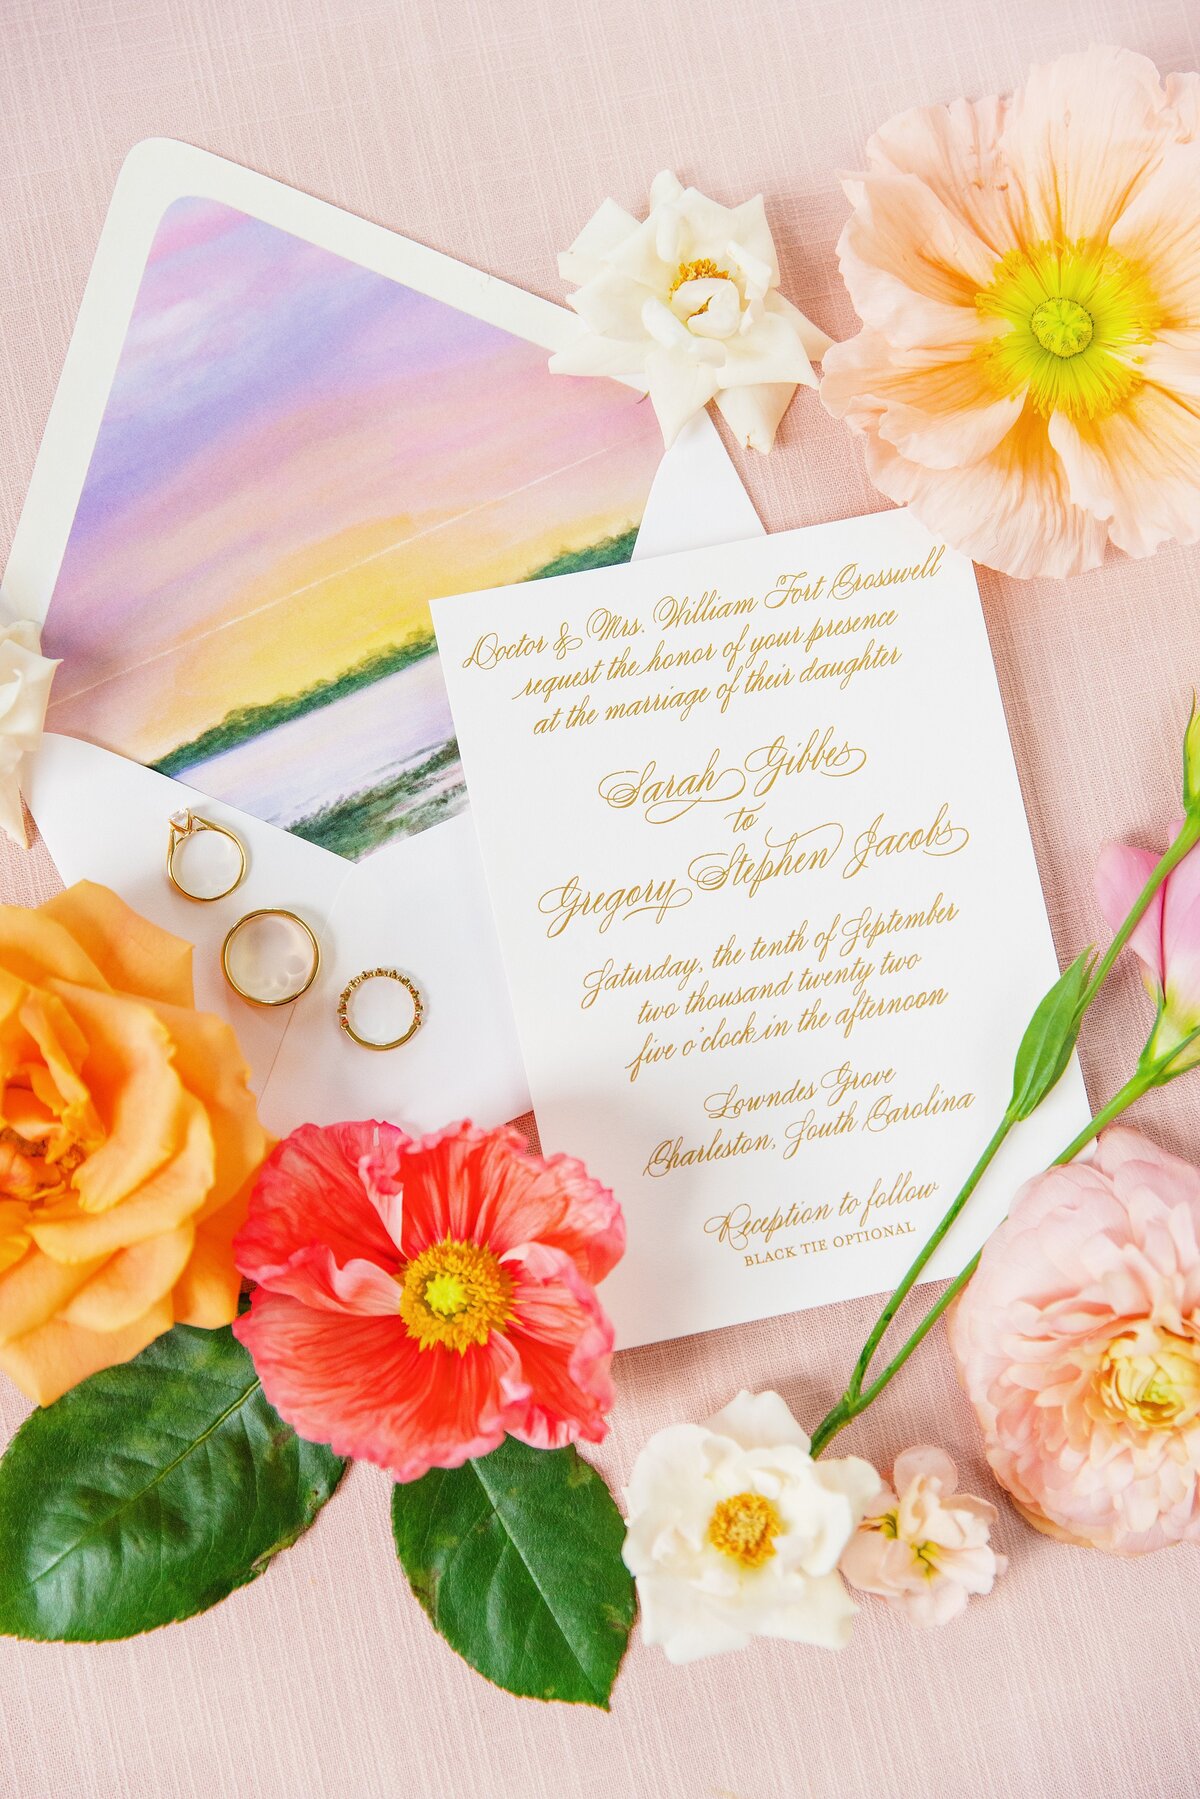 colorful stationery with envelope liner reflecting the sunset